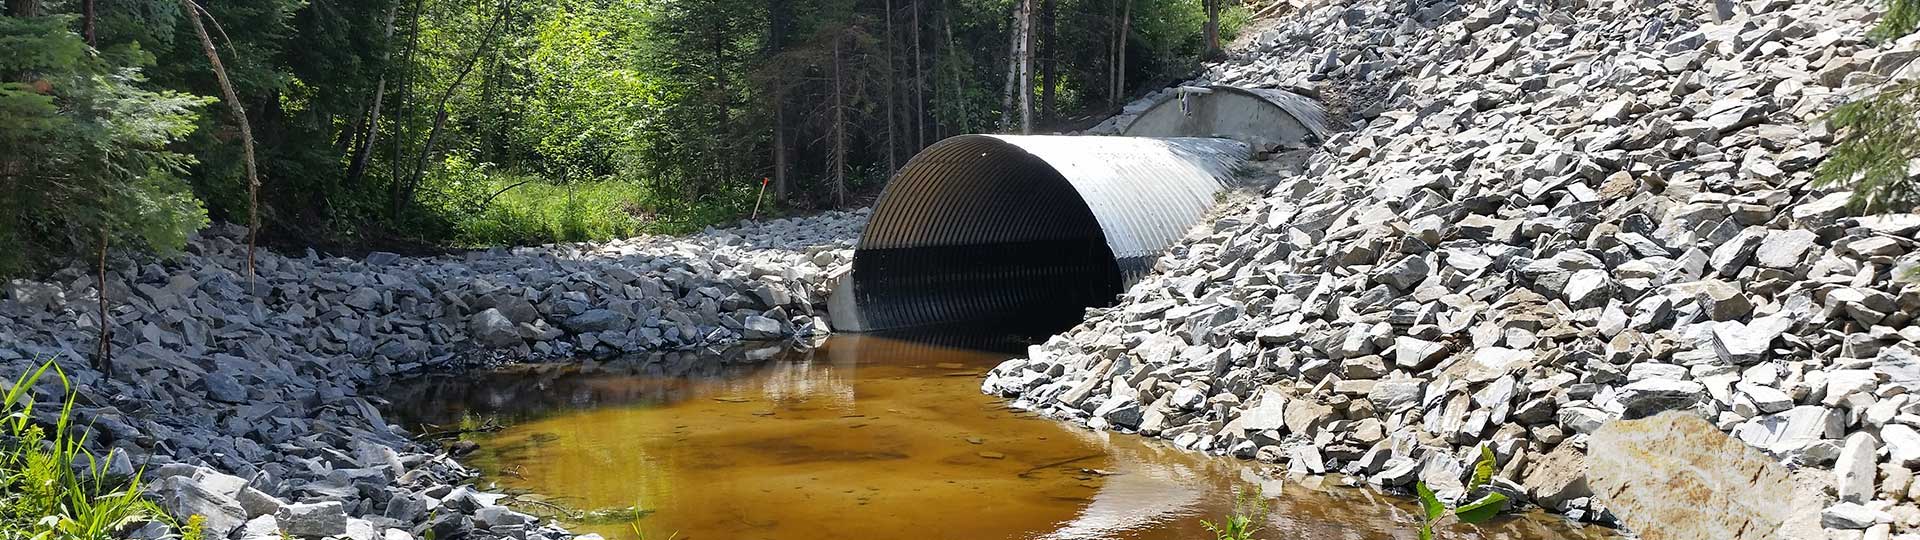 Canada Culvert - division of WGI Westman Group Inc.